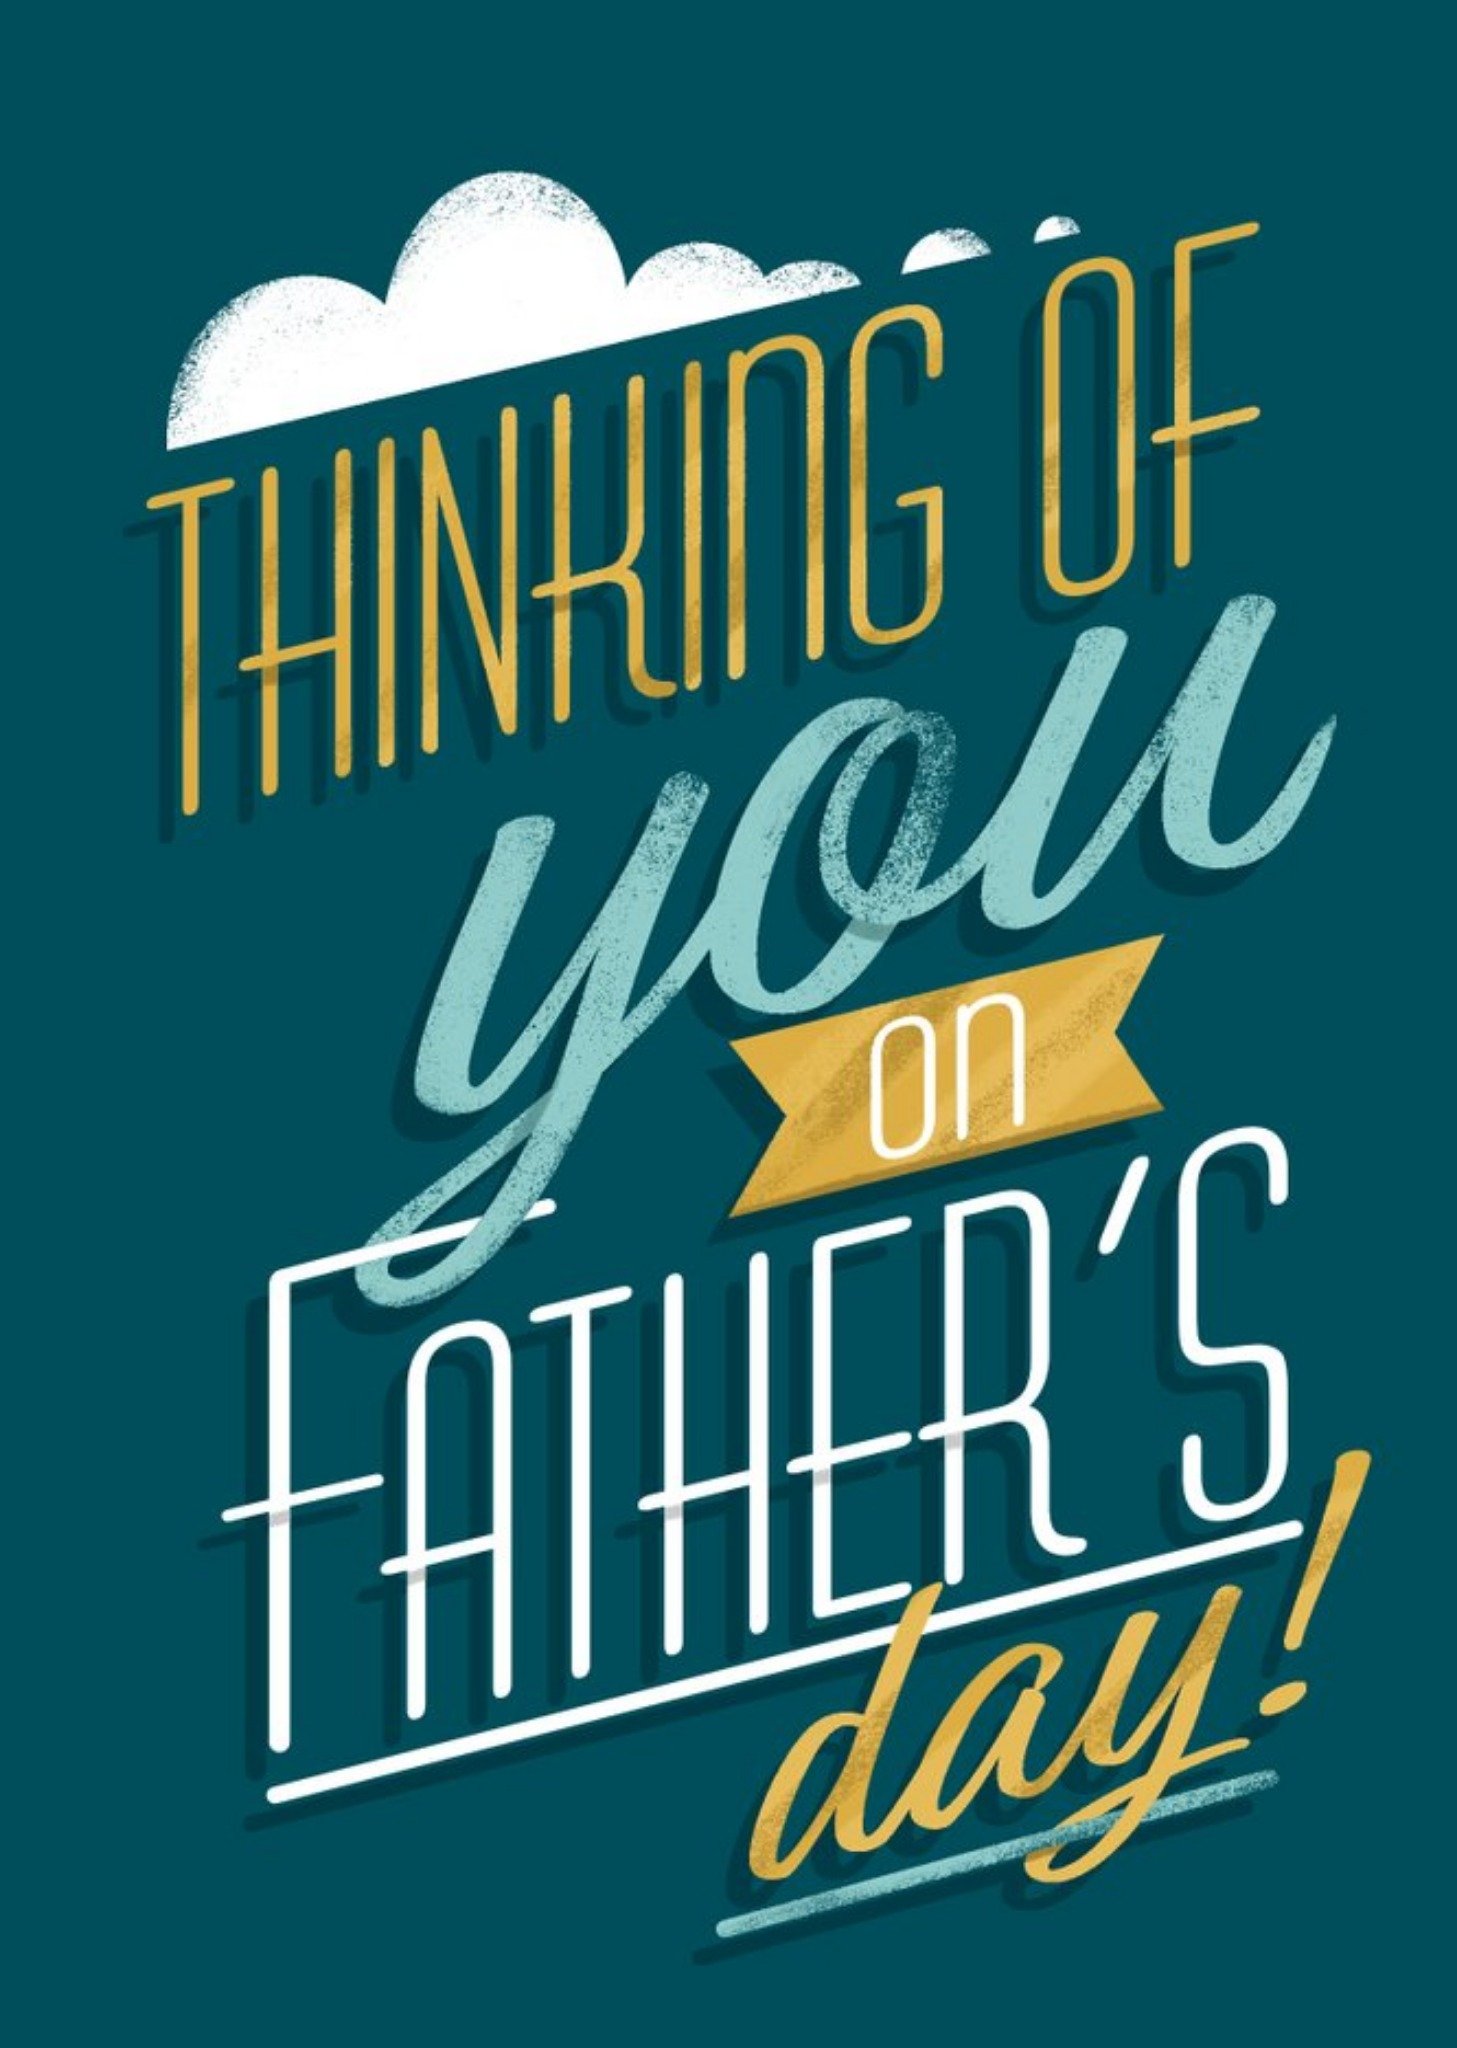 Moonpig Typographic Thinking Of You On Fathers Day Card Ecard